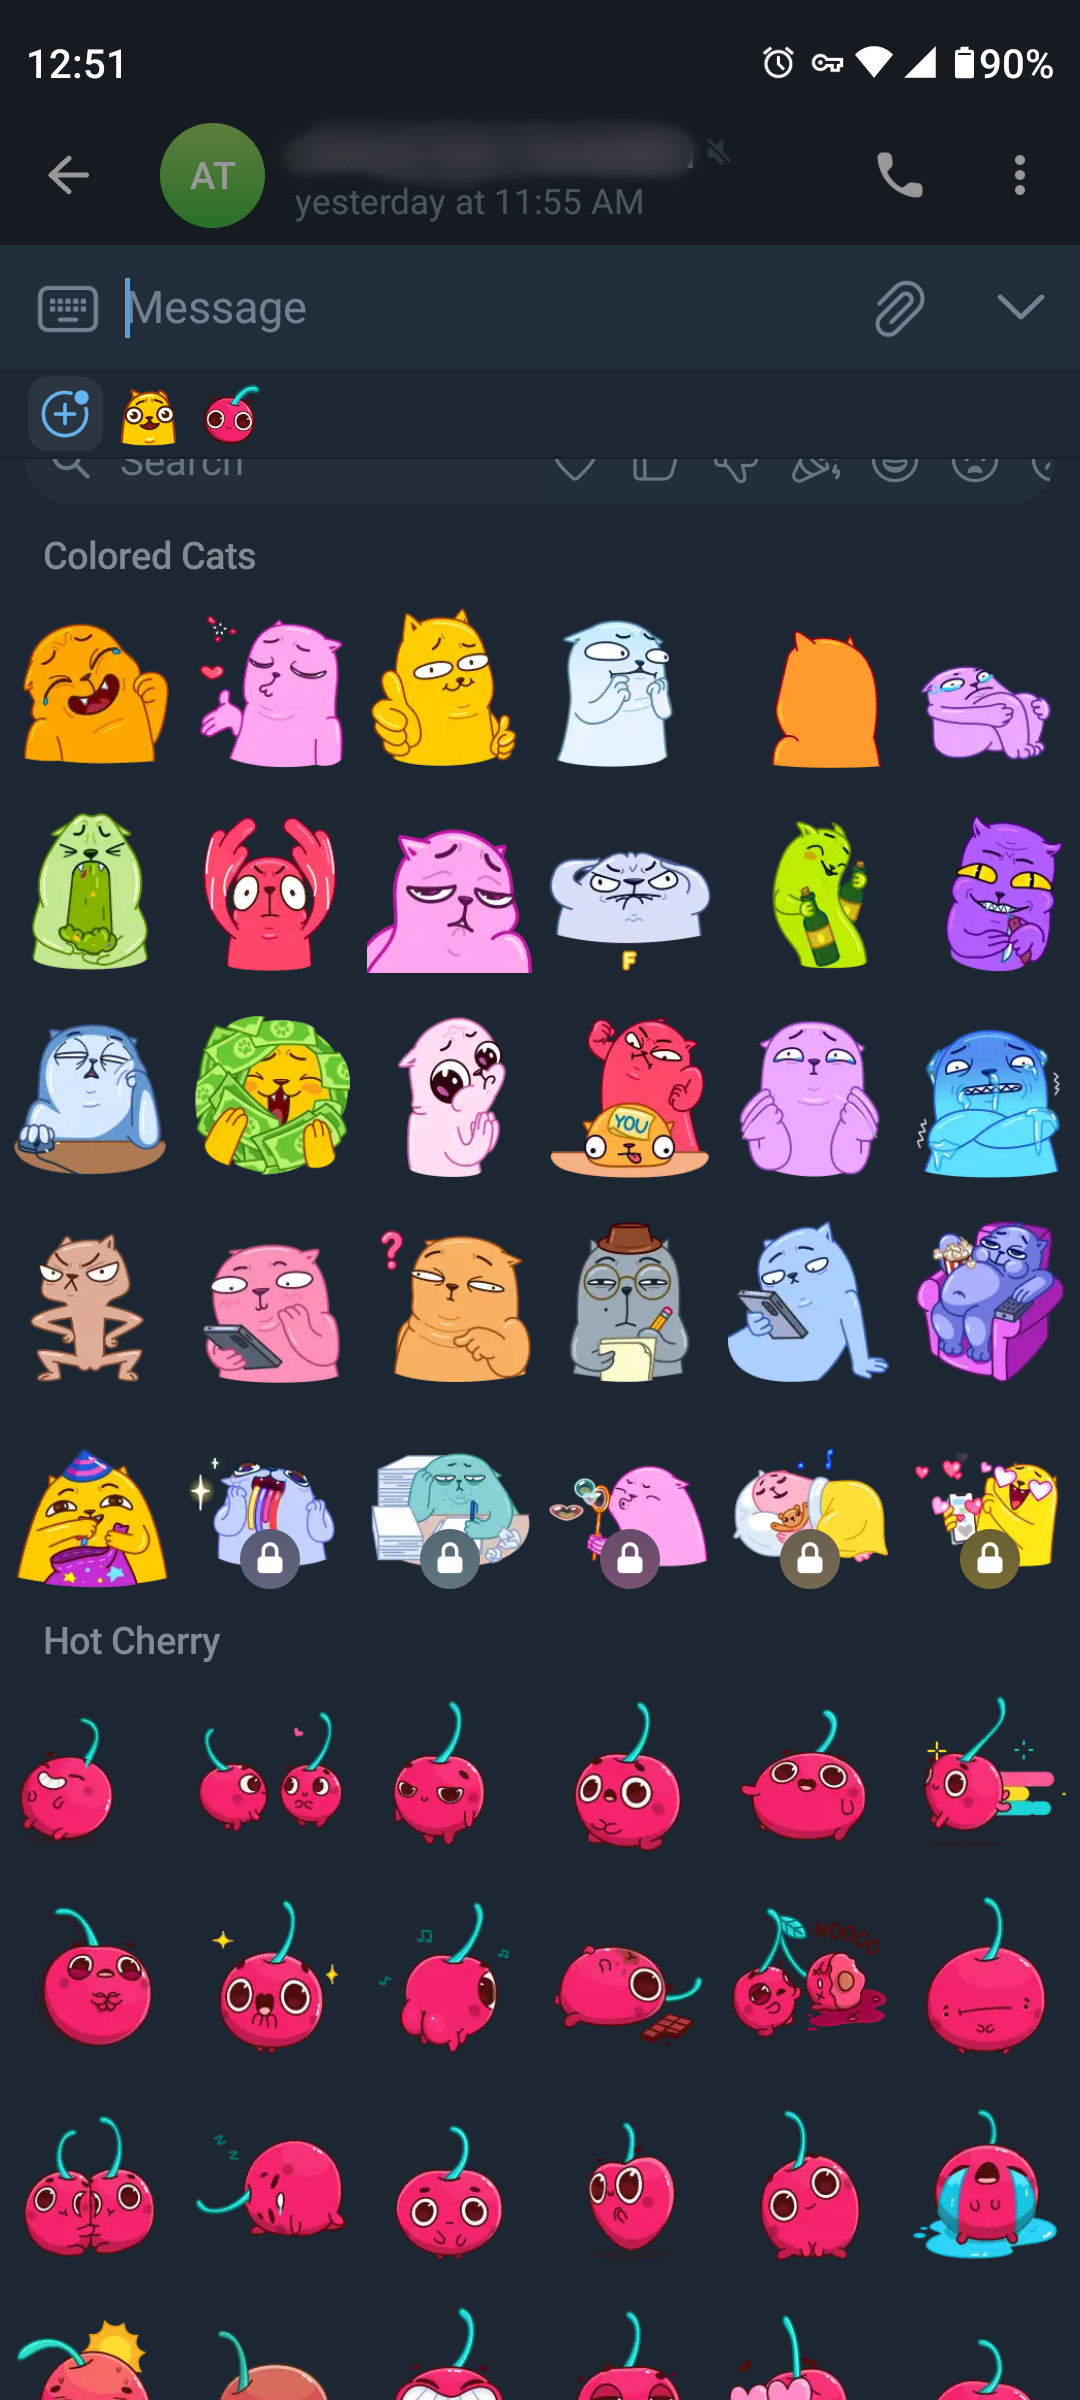 telegram stickers expanded